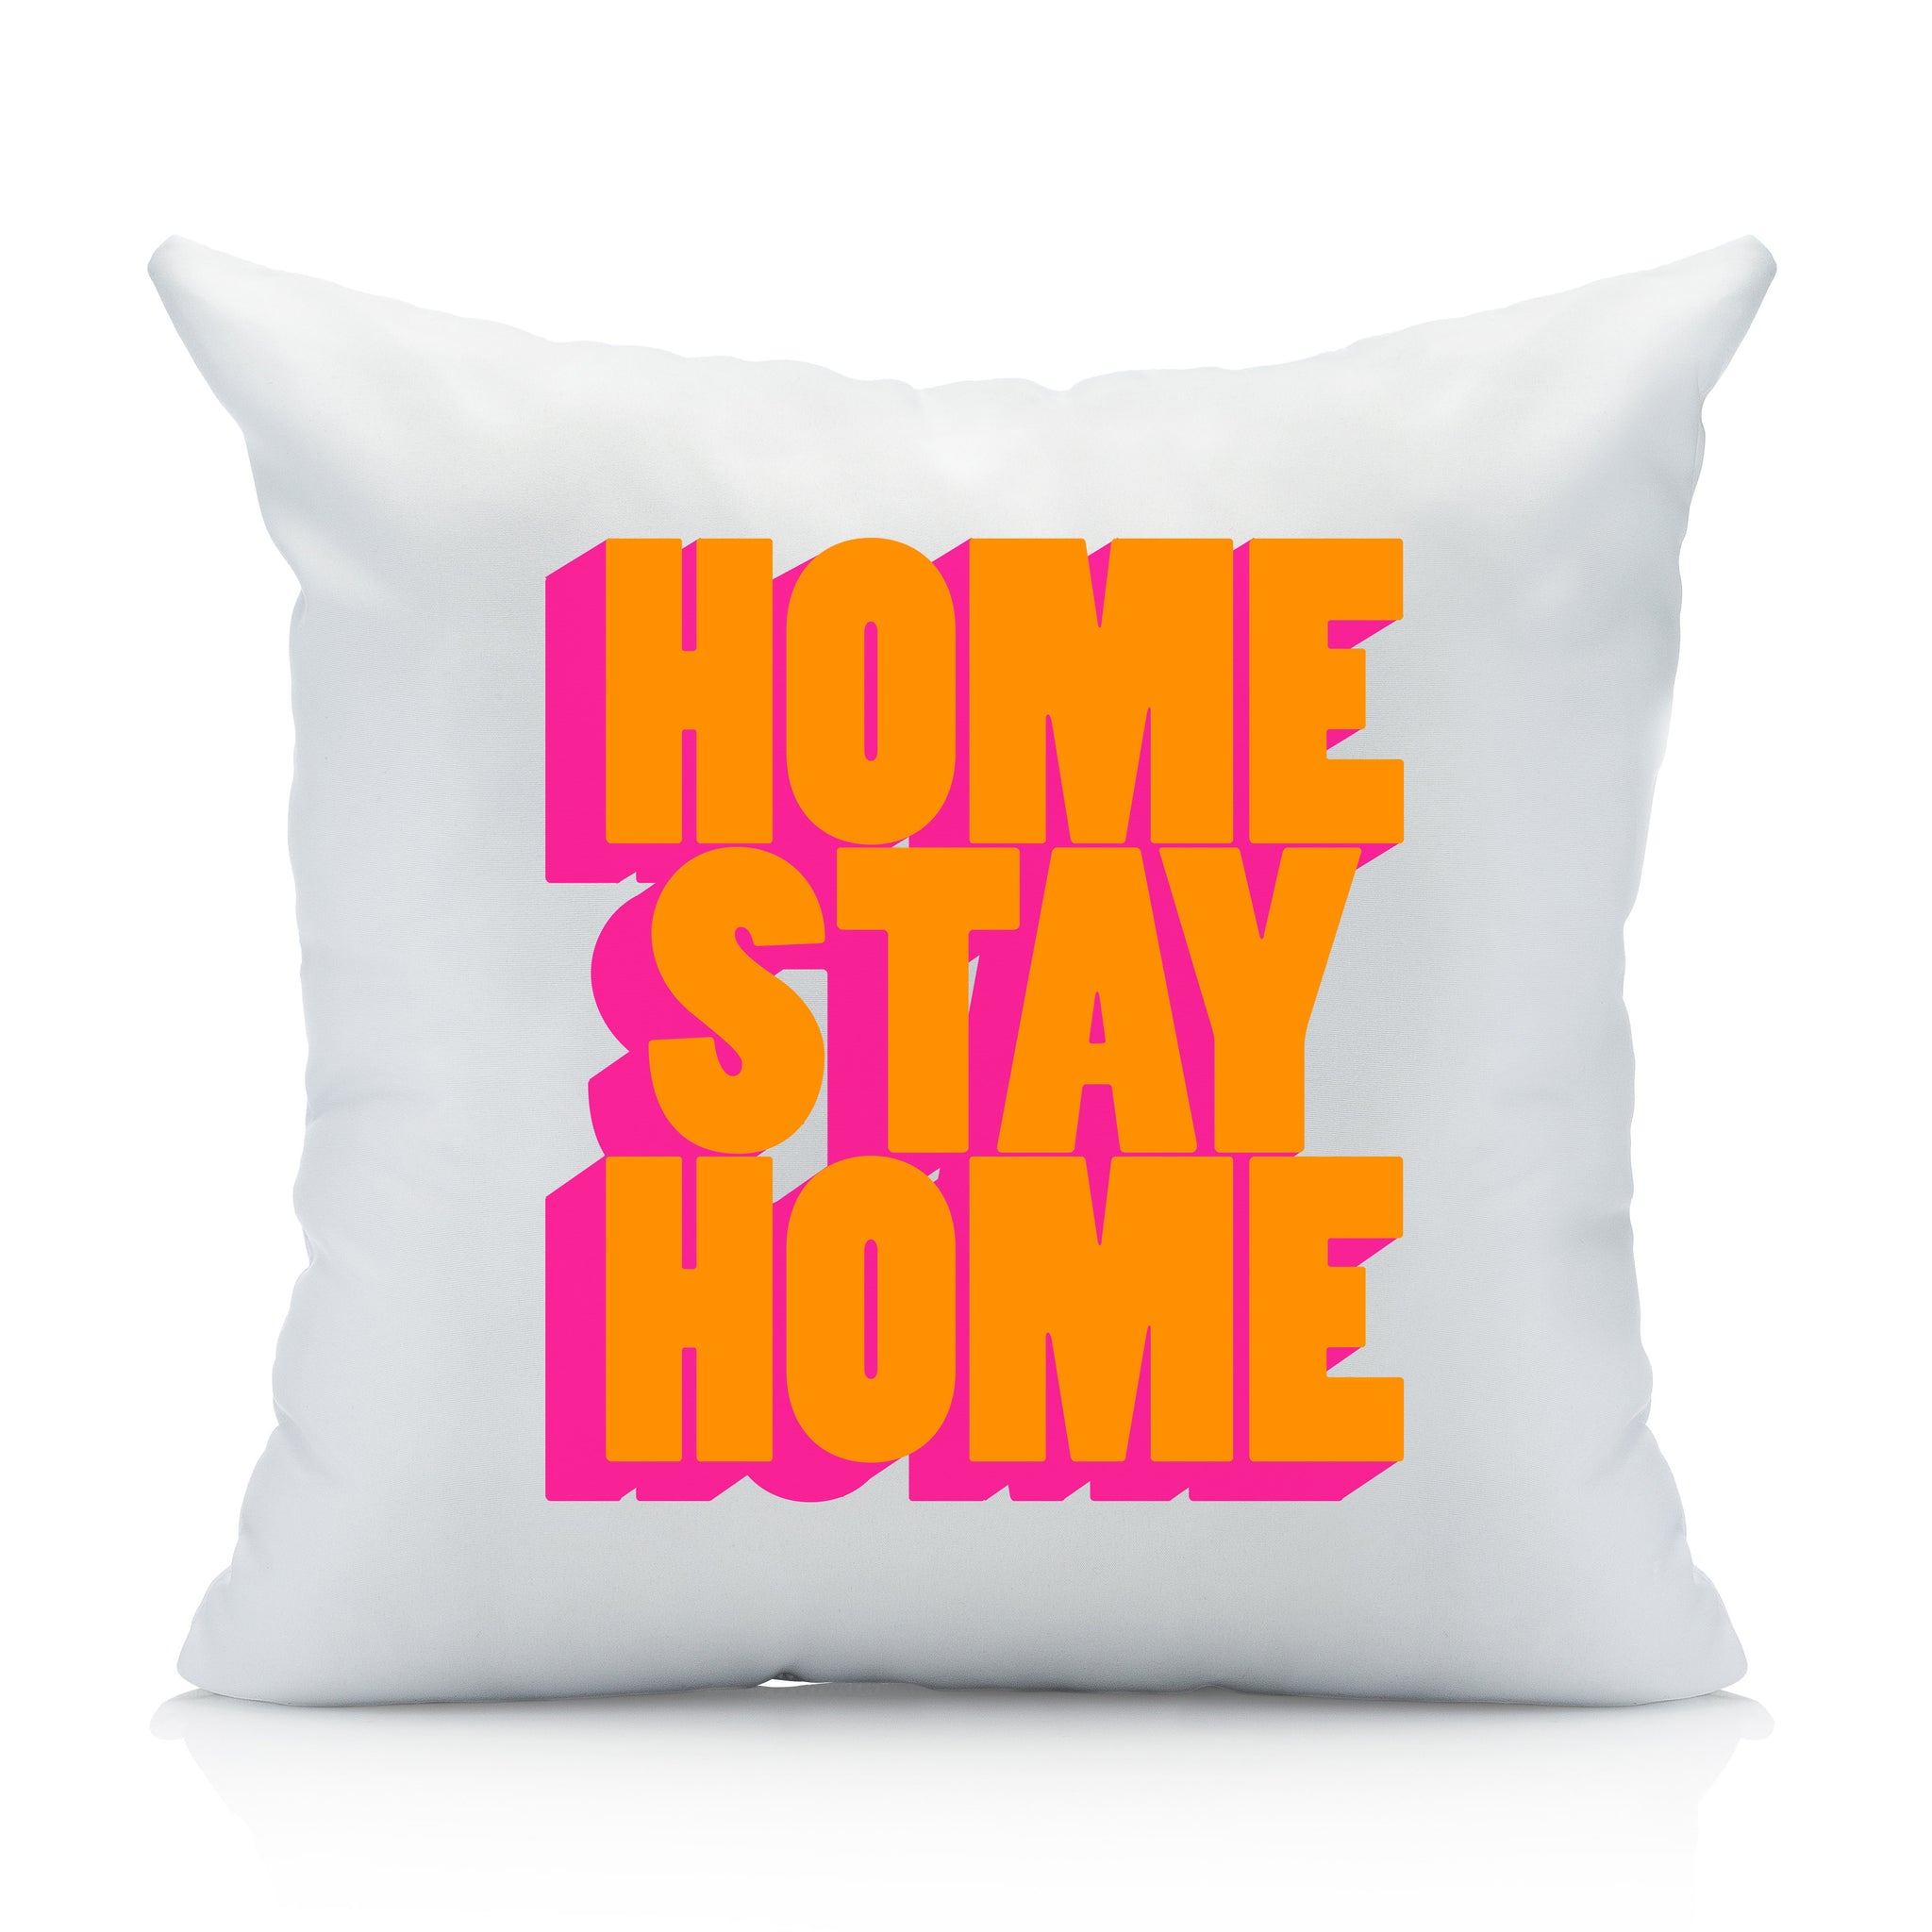 Home Stay Home Bold Throw Pillow Cover